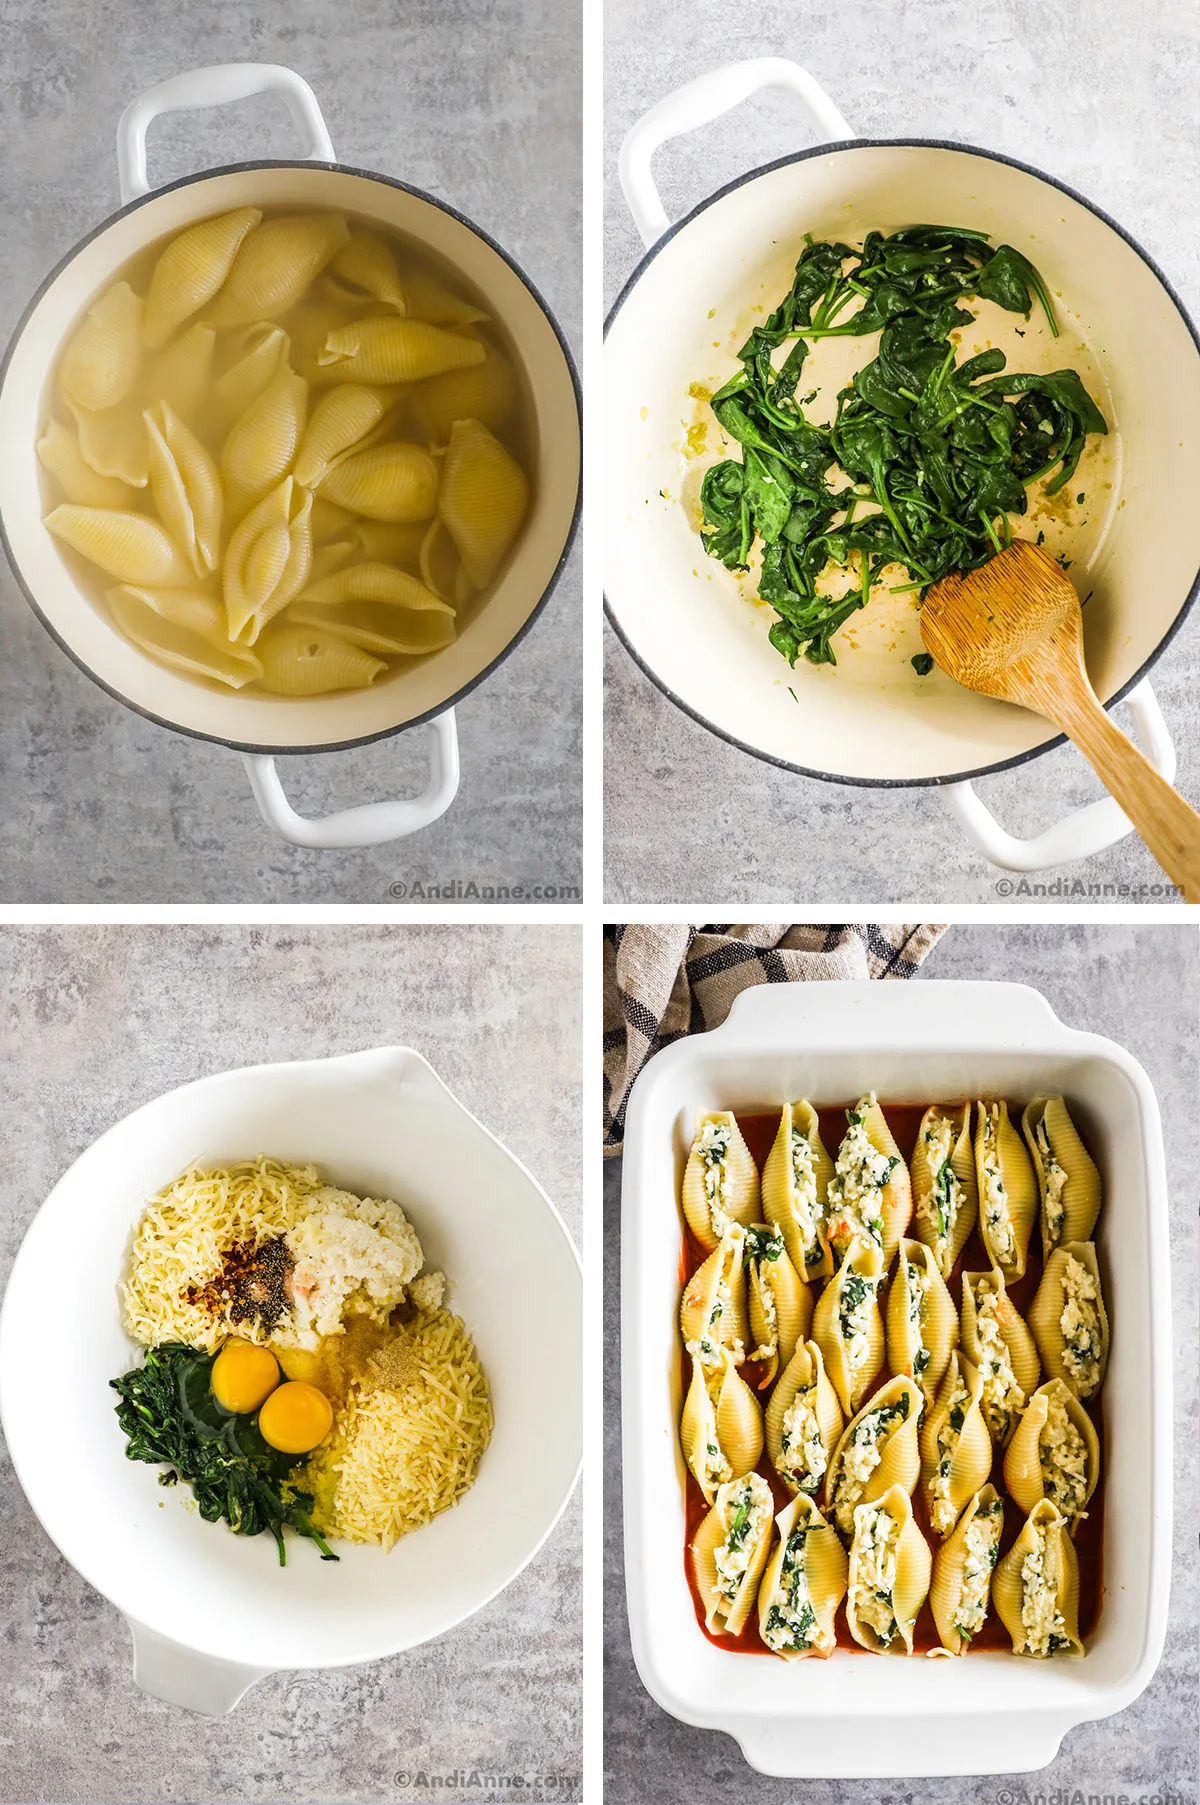 Four ingredients showing steps to make recipe. First is a pot with water and pasta. Second is wilted spinach in a pot. Third is a bowl with cheeses, eggs, spinach and spices. Fourth is jumbo shells stuffed with ricotta spinach mixture in a baking dish.